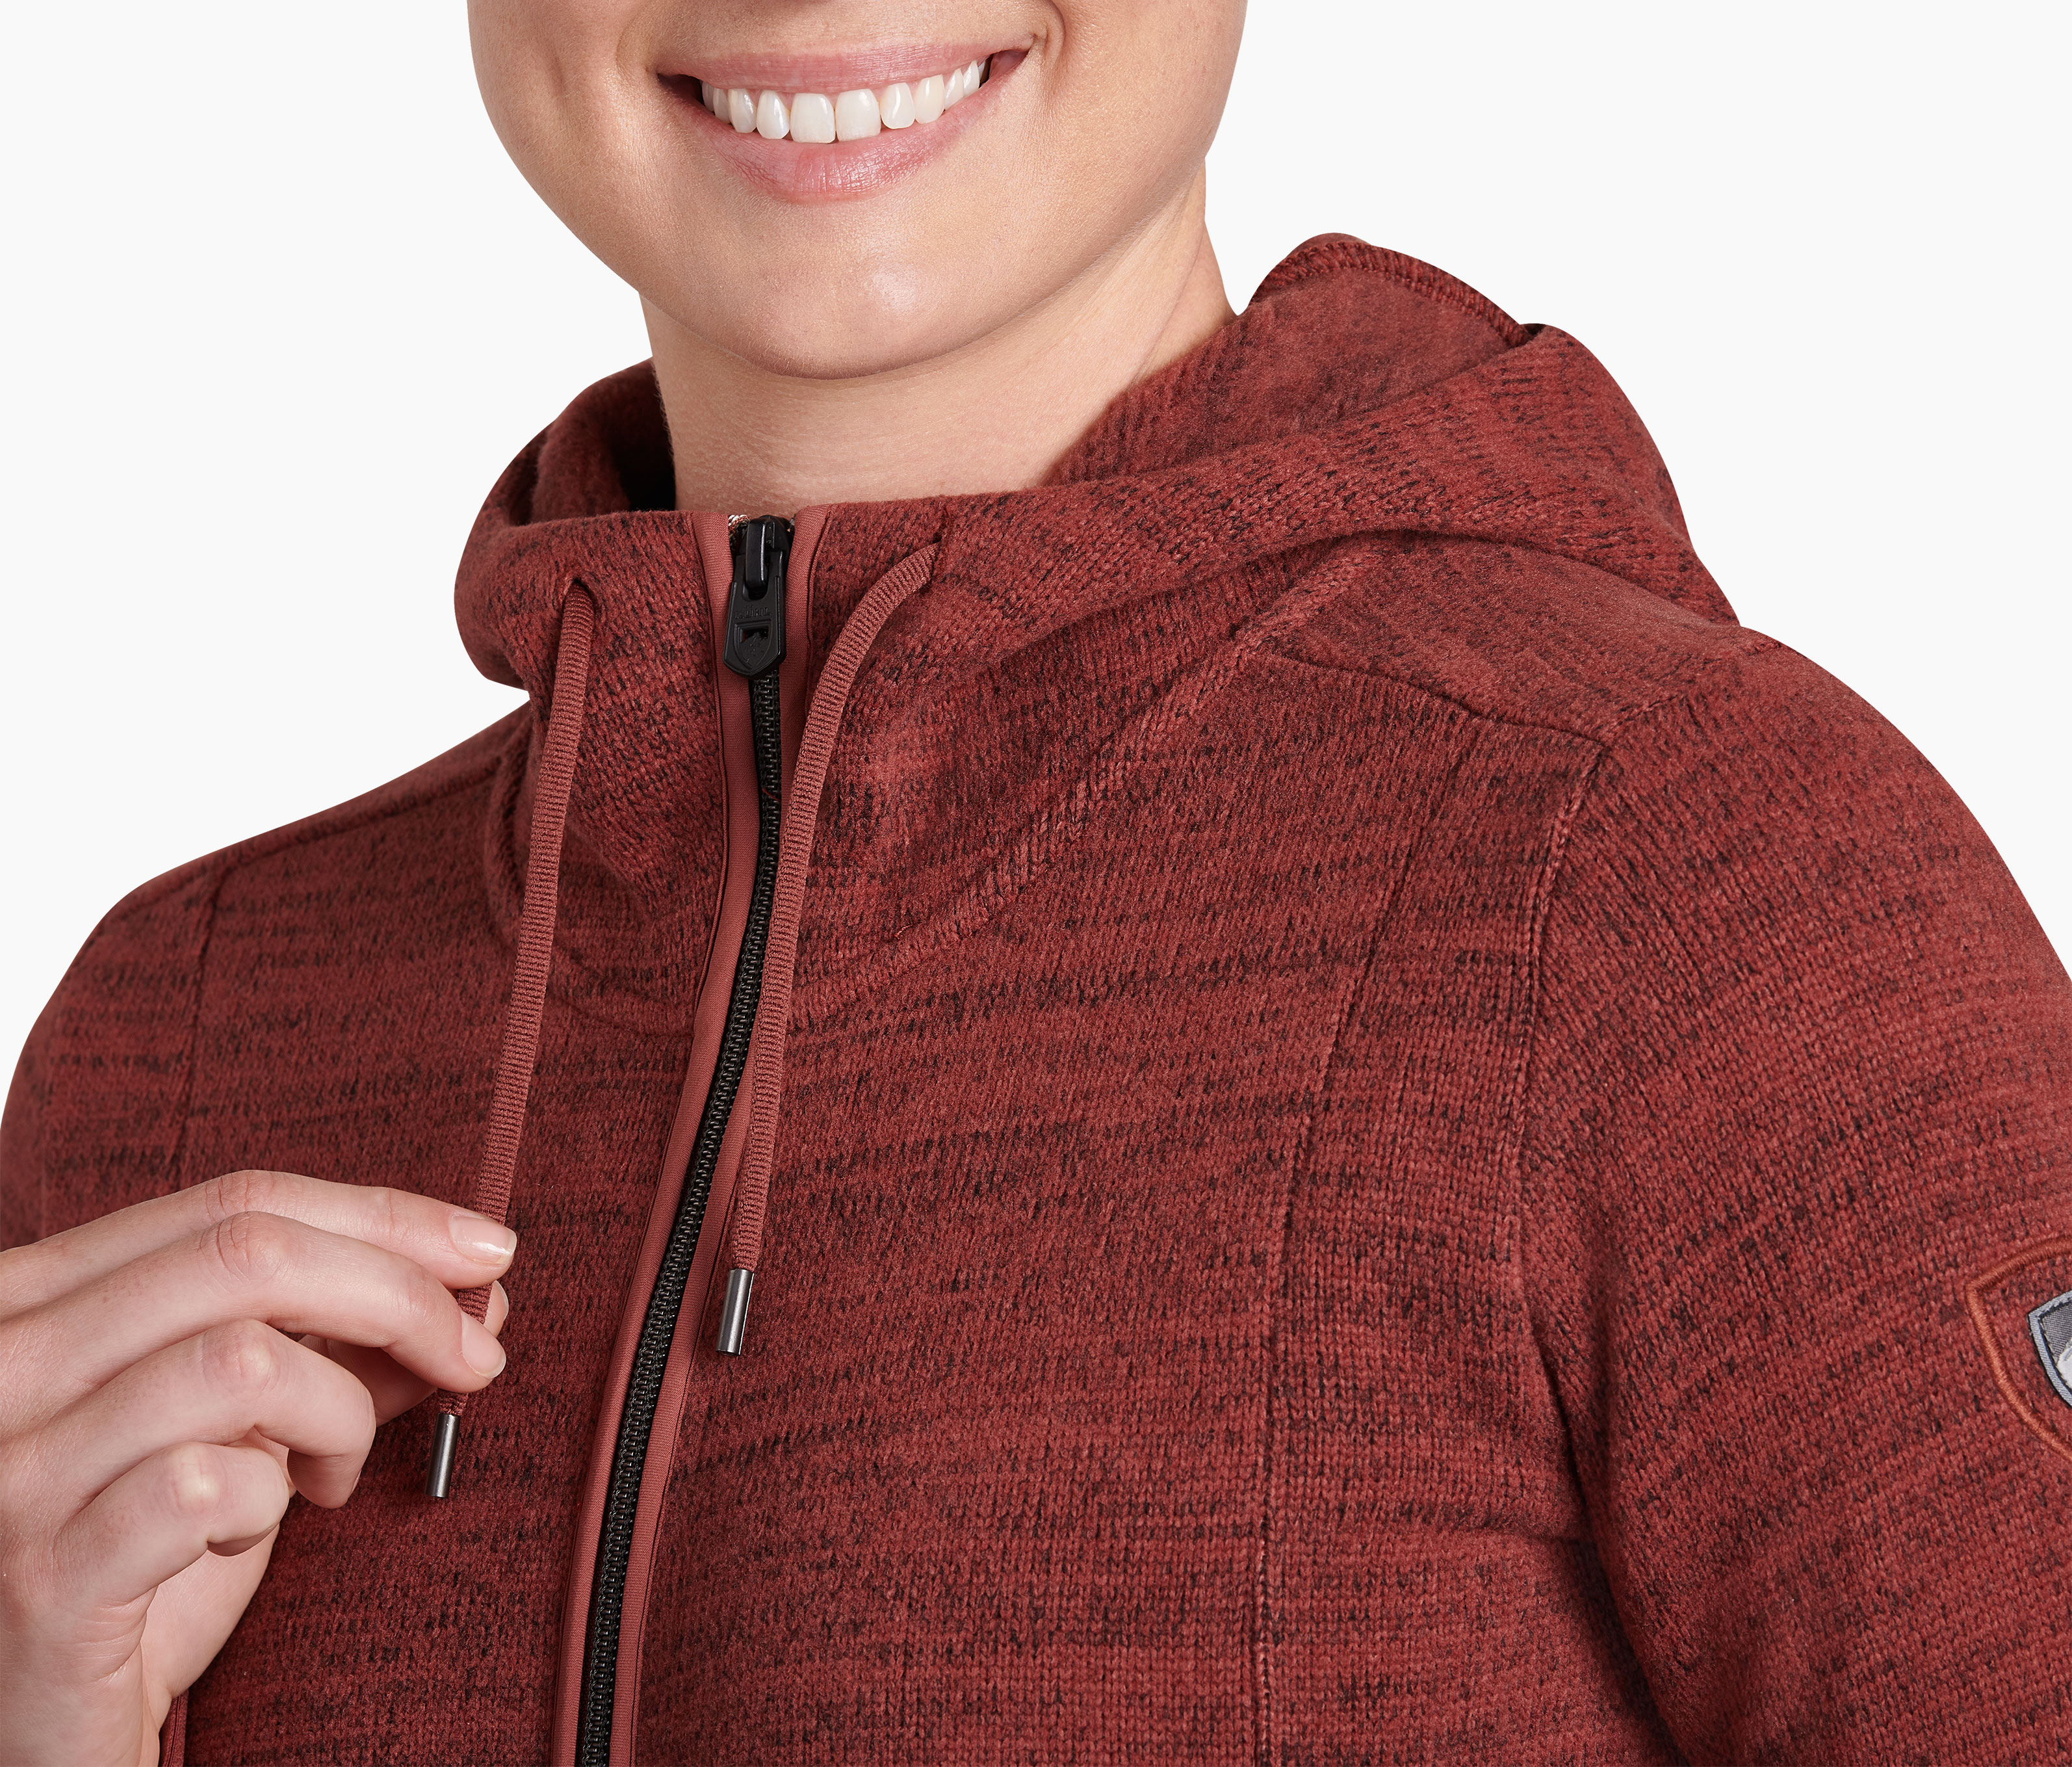 KUHL Women's Ascendyr Hoody (Discontinued) - True Outdoors